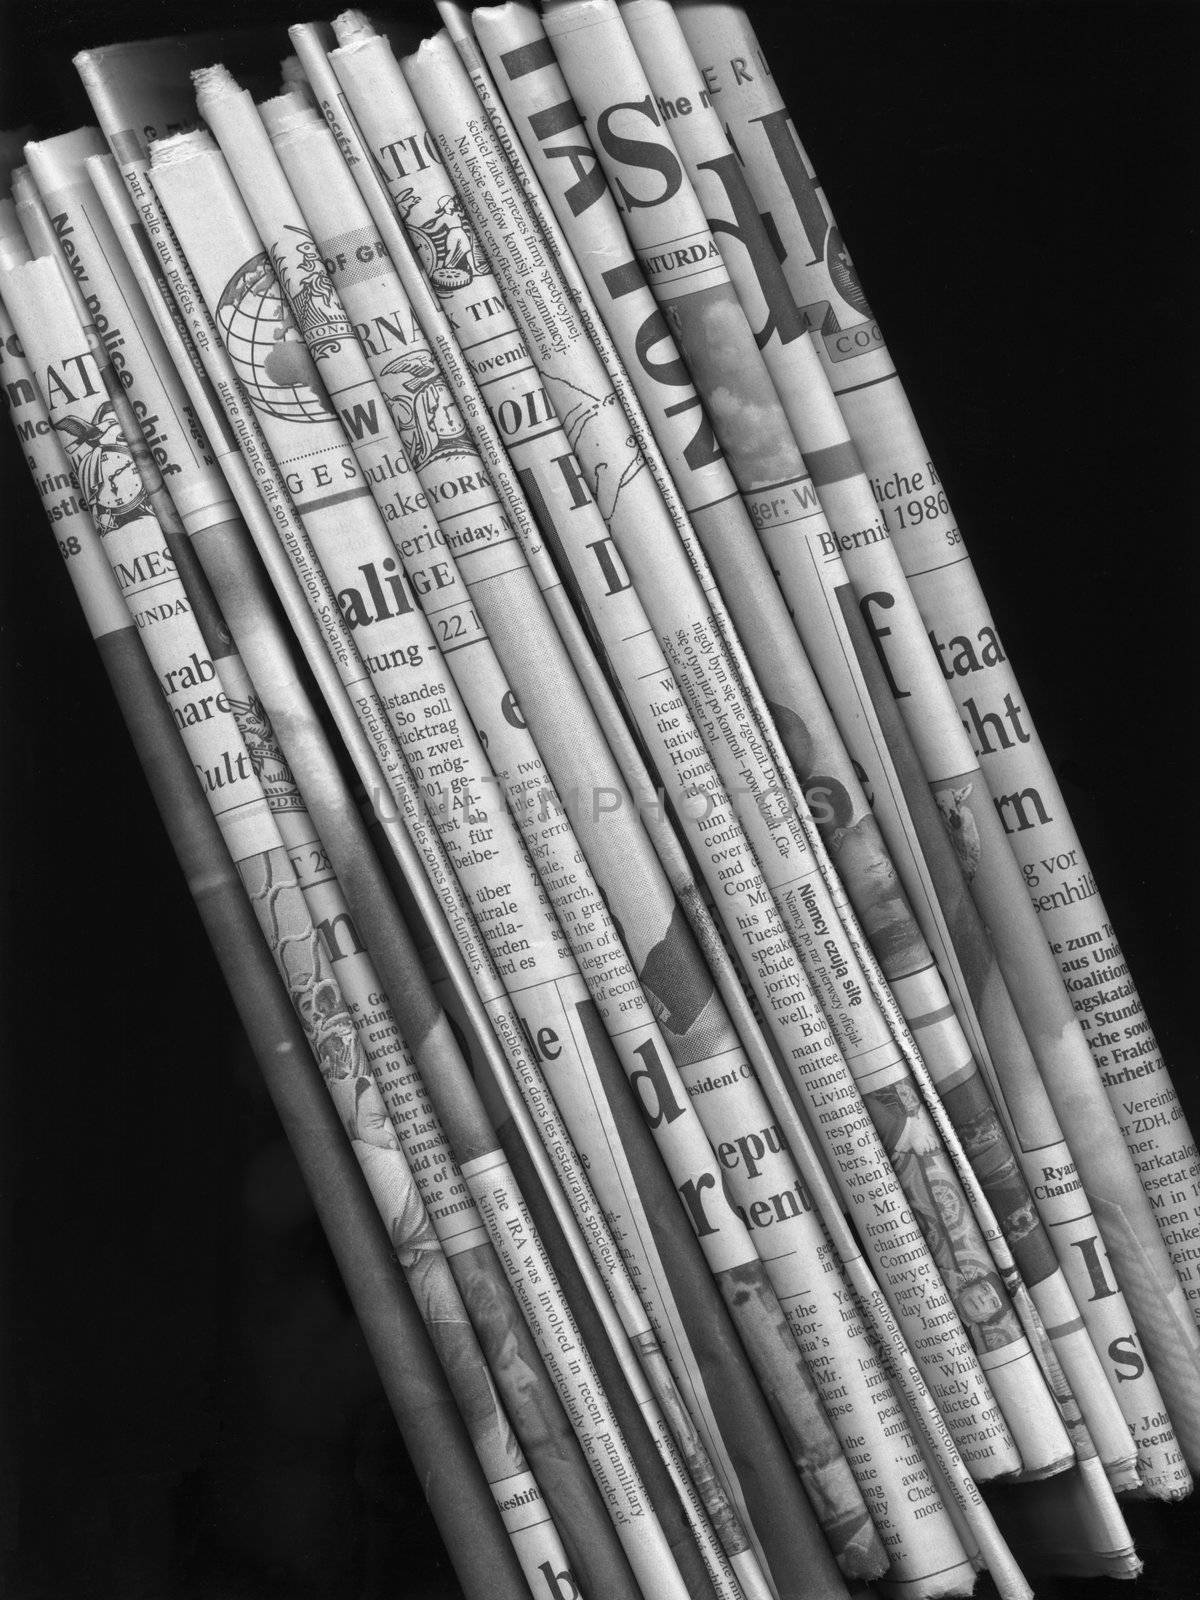 Stack of international newspapers - in black and white